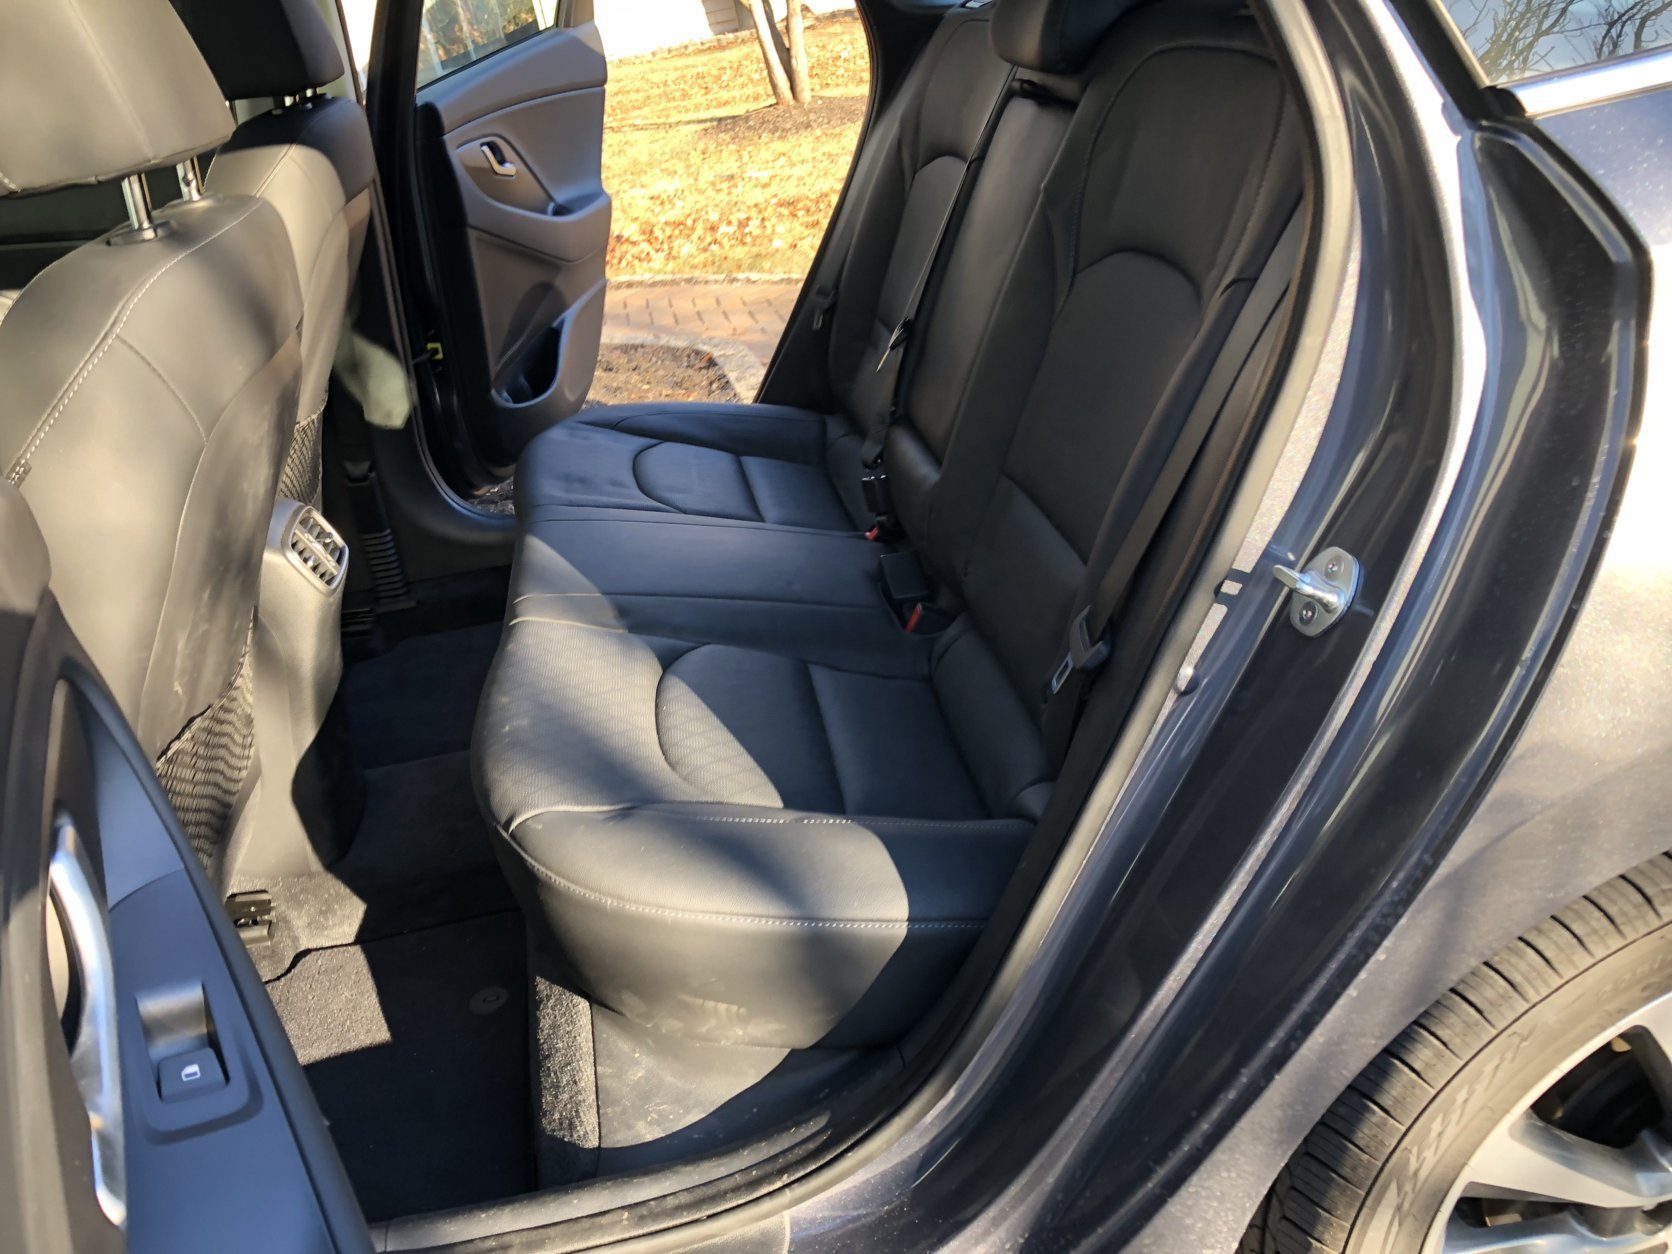 Back seats have good leg room, but the headroom isn’t great, with the optional panoramic sunroof. Taller riders better stick to the front seat. (WTOP/Mike Parris)